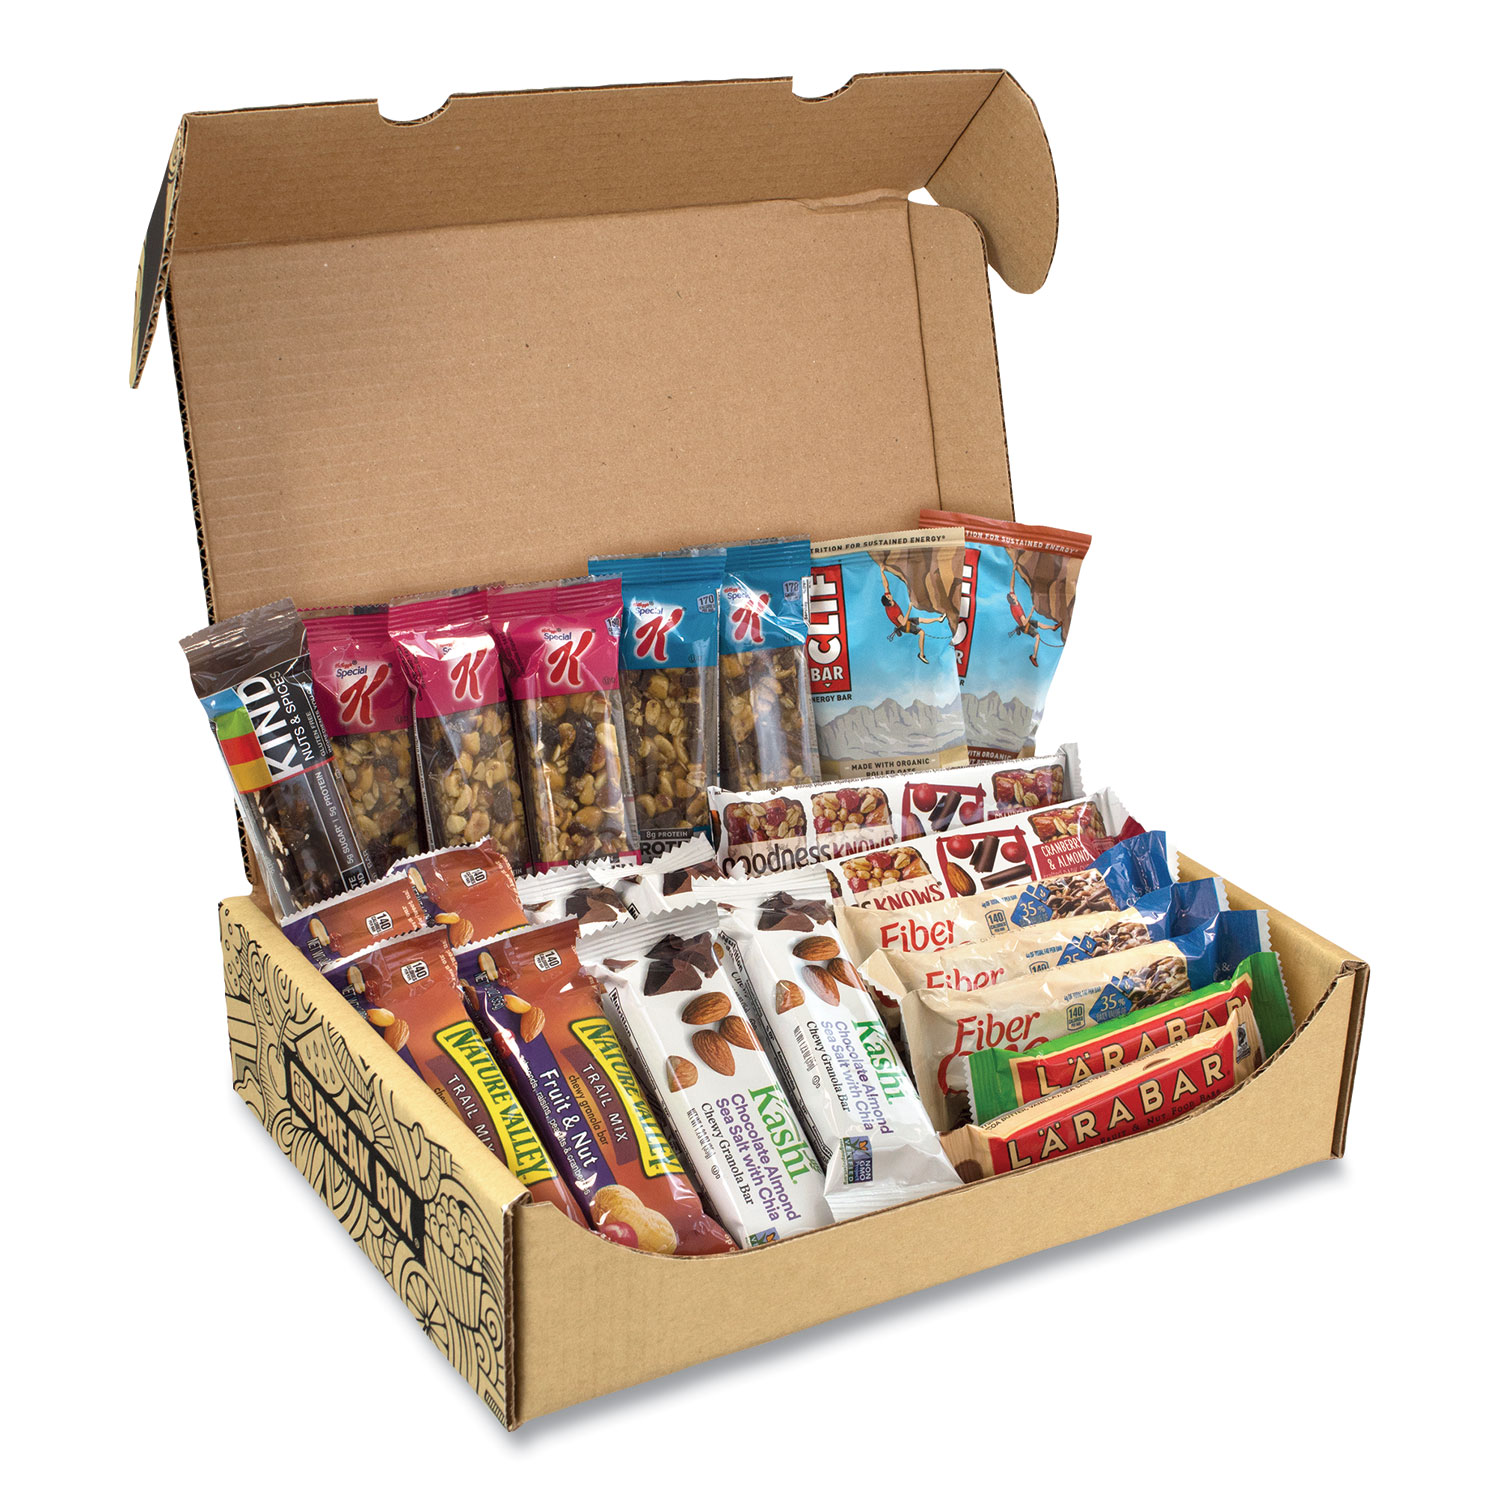  Snack Box Pros 70000001 Healthy Snack Bar Box, 23 Assorted Snacks, Free Delivery in 1-4 Business Days (GRR700S0001) 